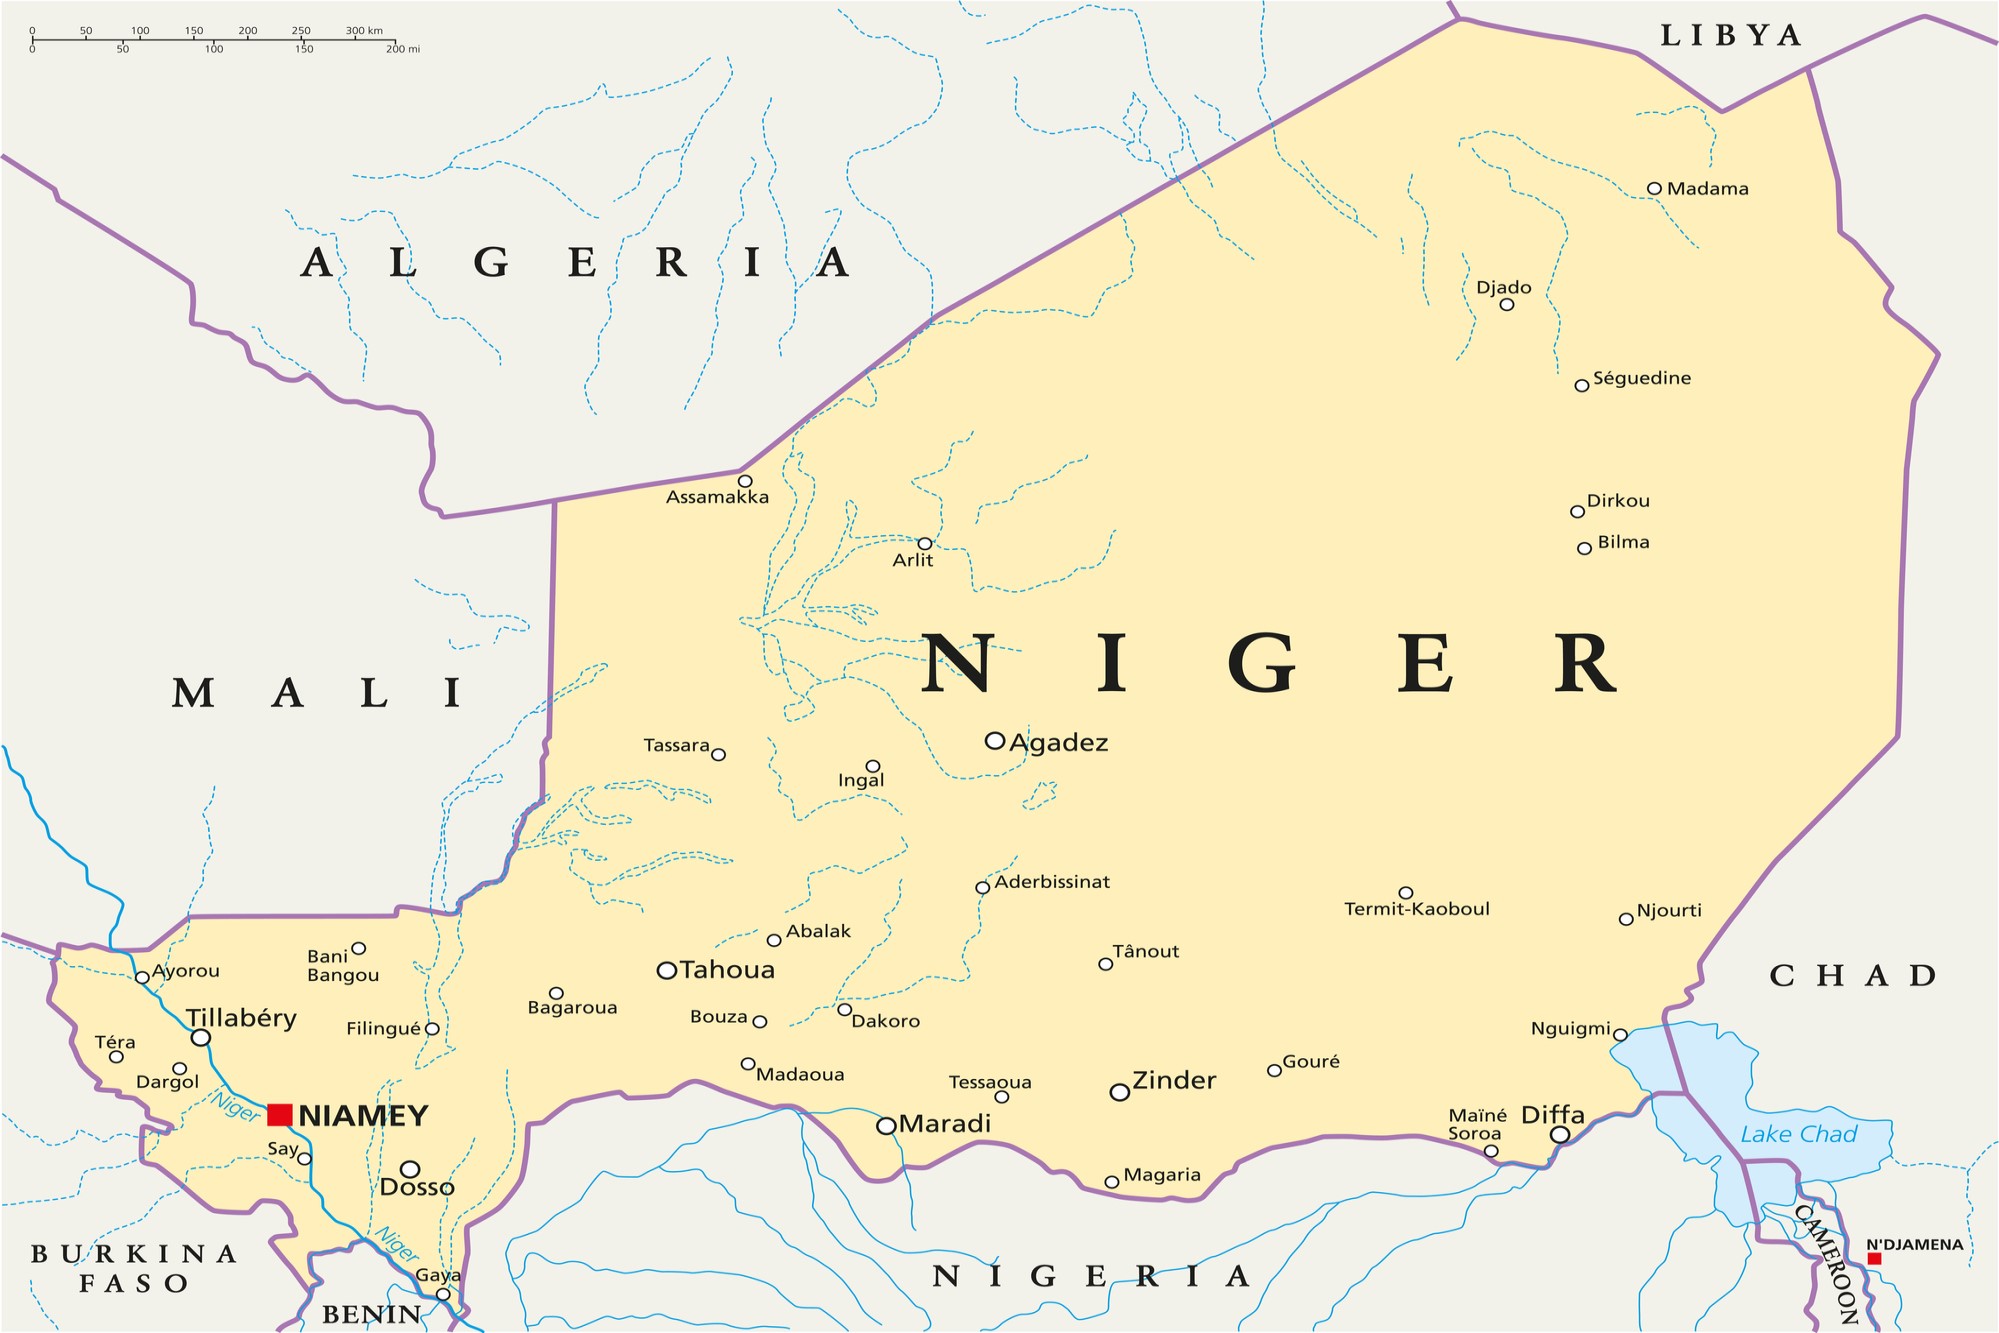 Map of Niger and adjacent countries